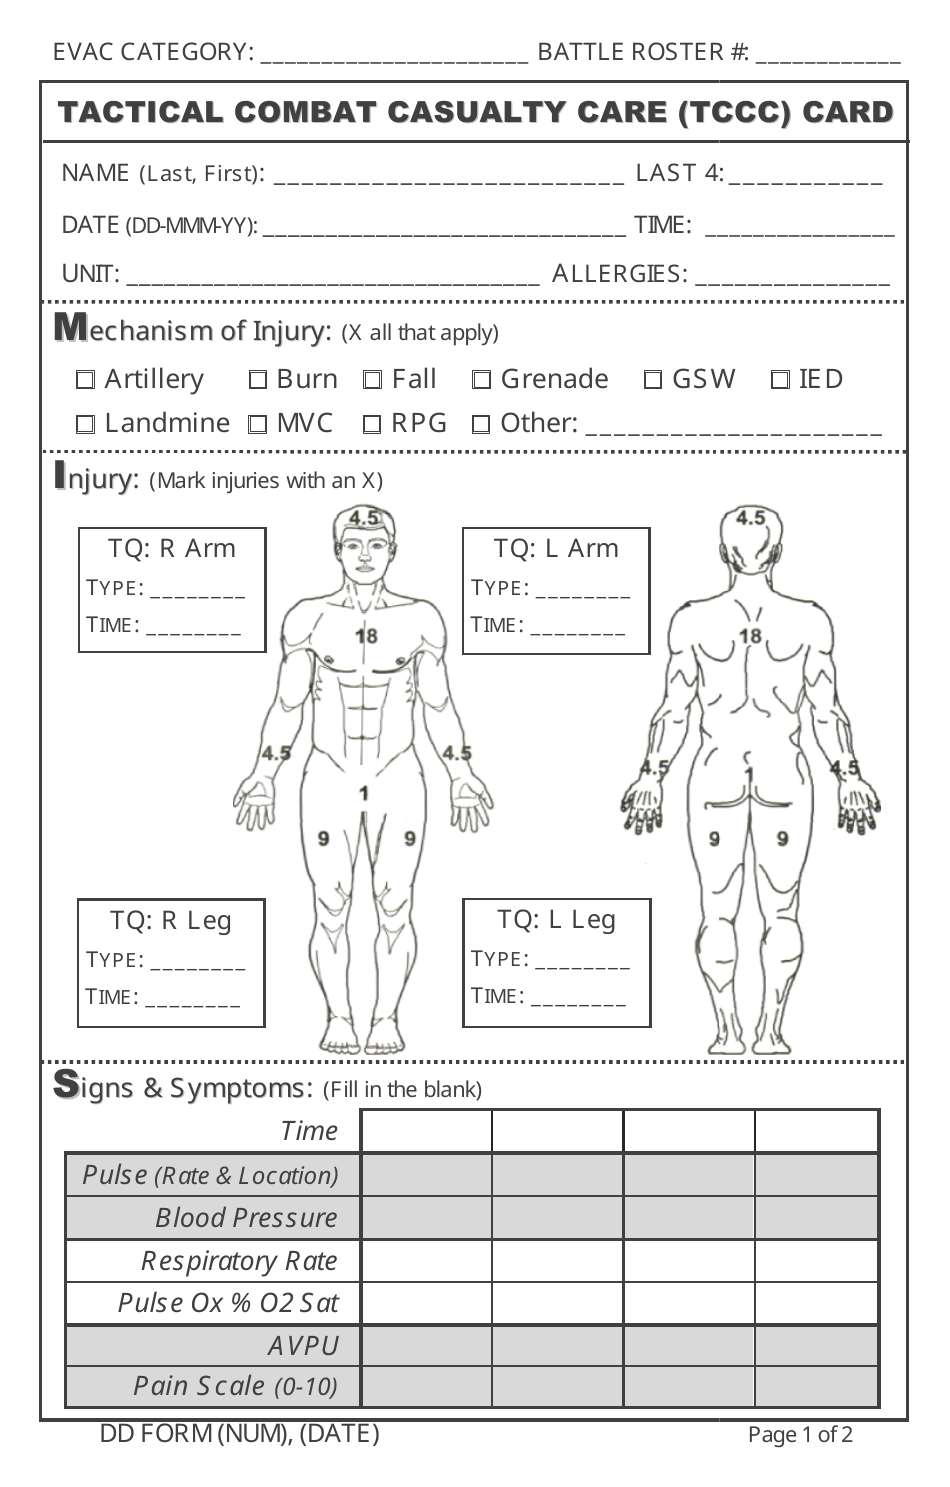 DD Form 1380 Tactical Combat Casualty Care (Tccc) Card, Page 1